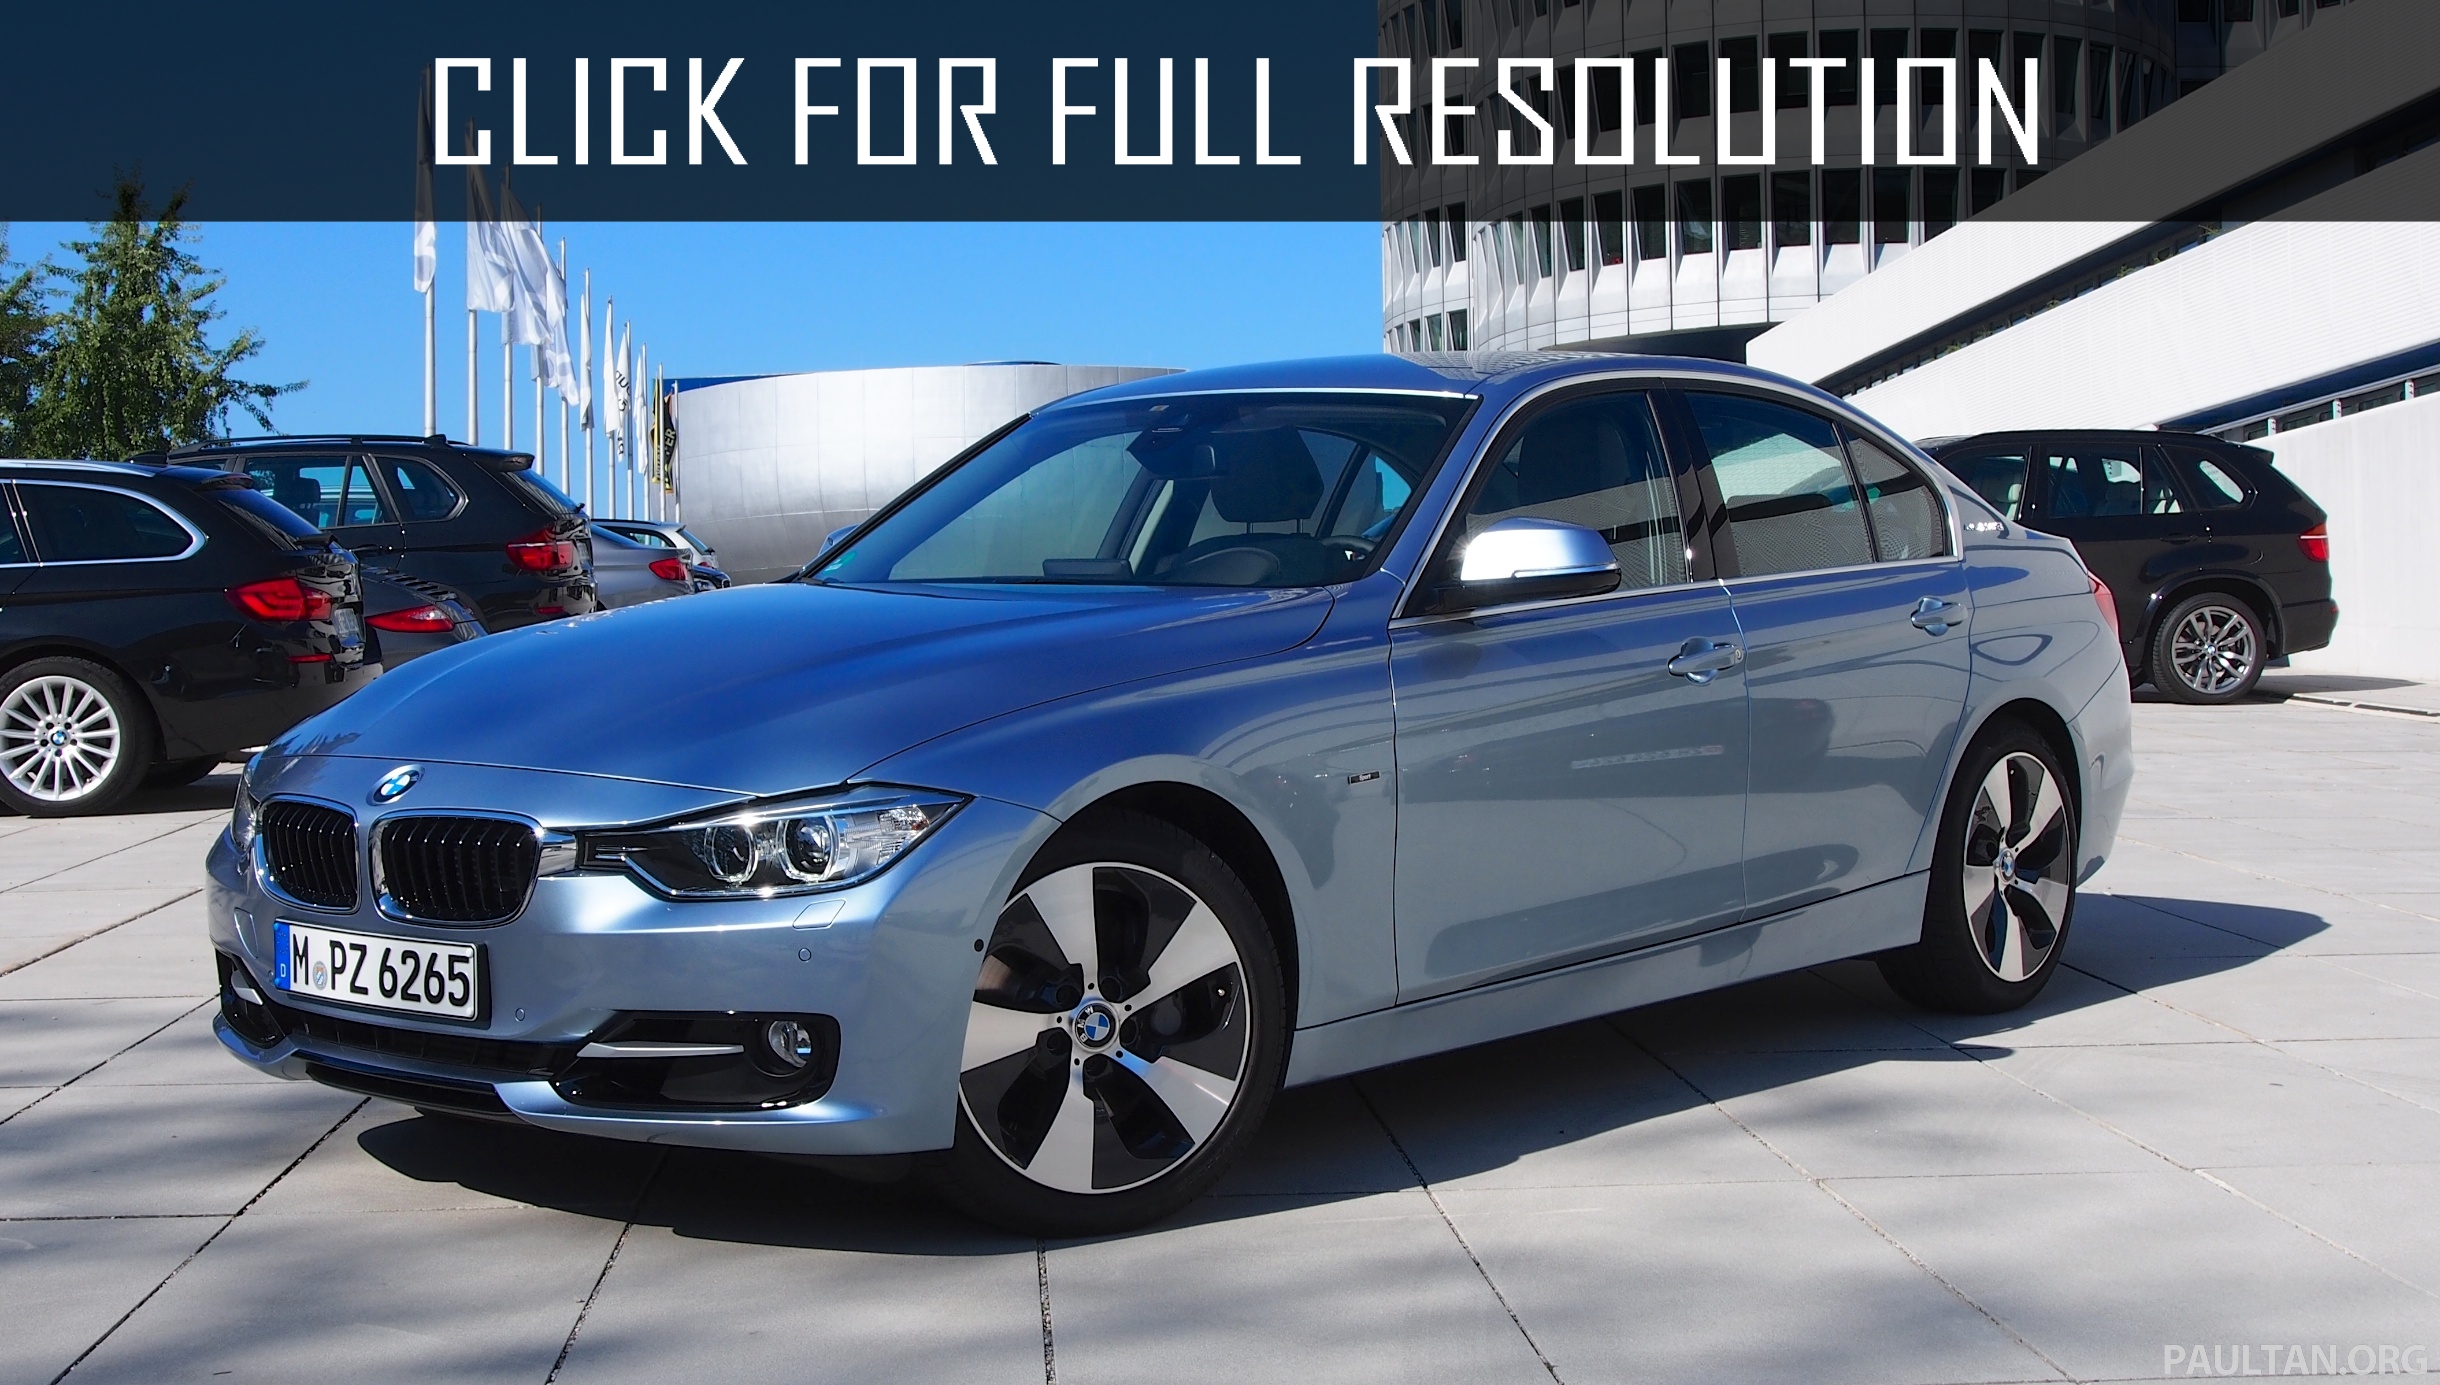 Bmw 335i Hybrid amazing photo gallery, some information and